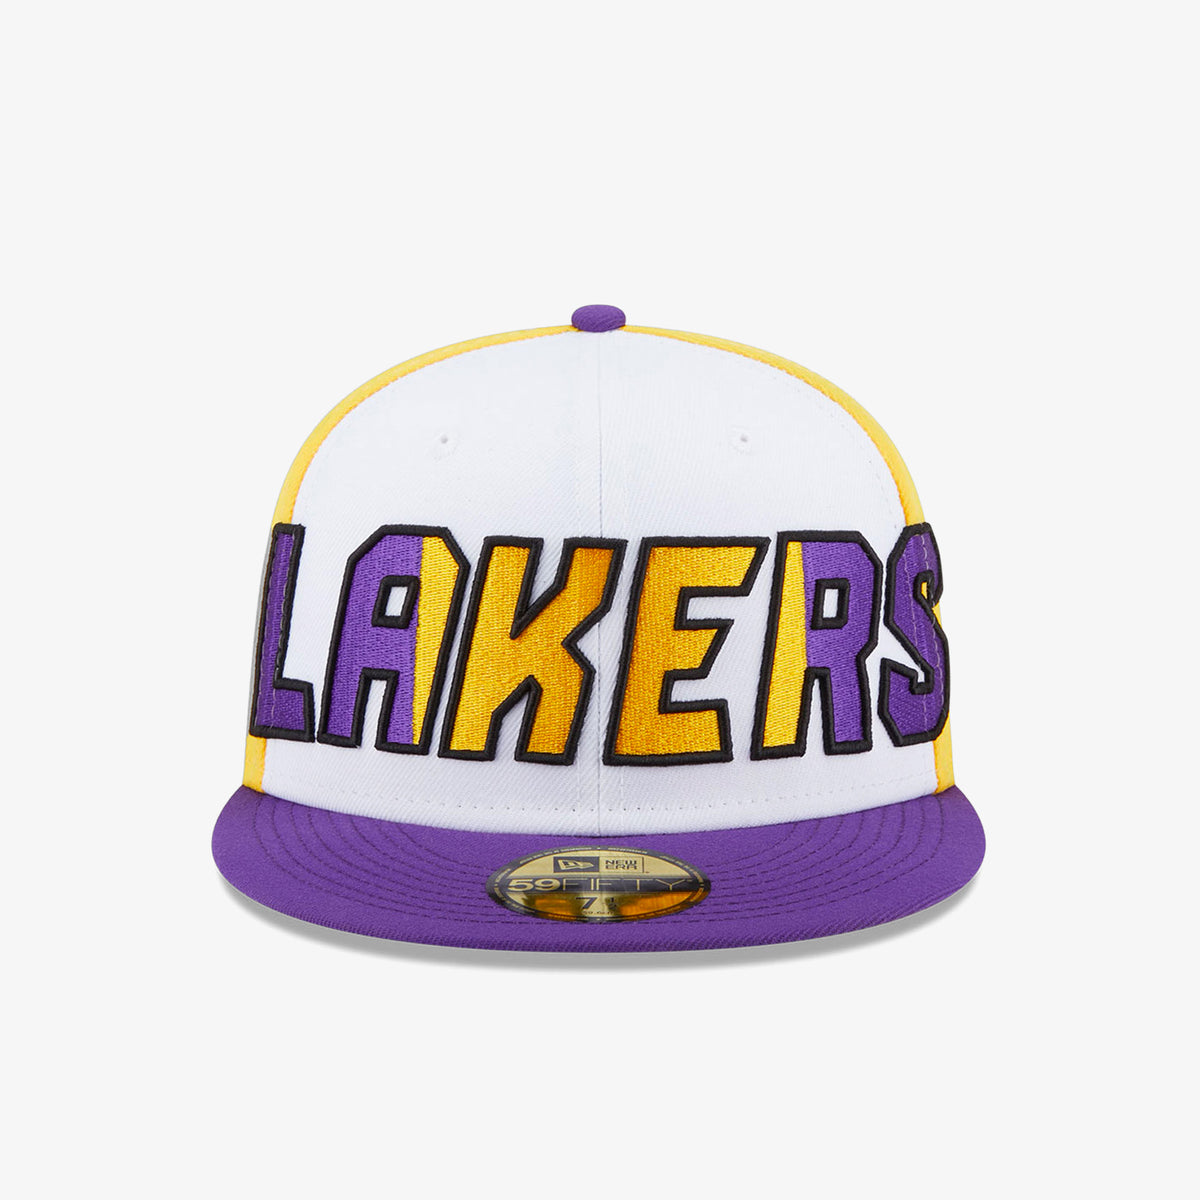 Los Angeles Lakers Mitchell & Ness Half and Half Snapback Hat - Purple/Gold